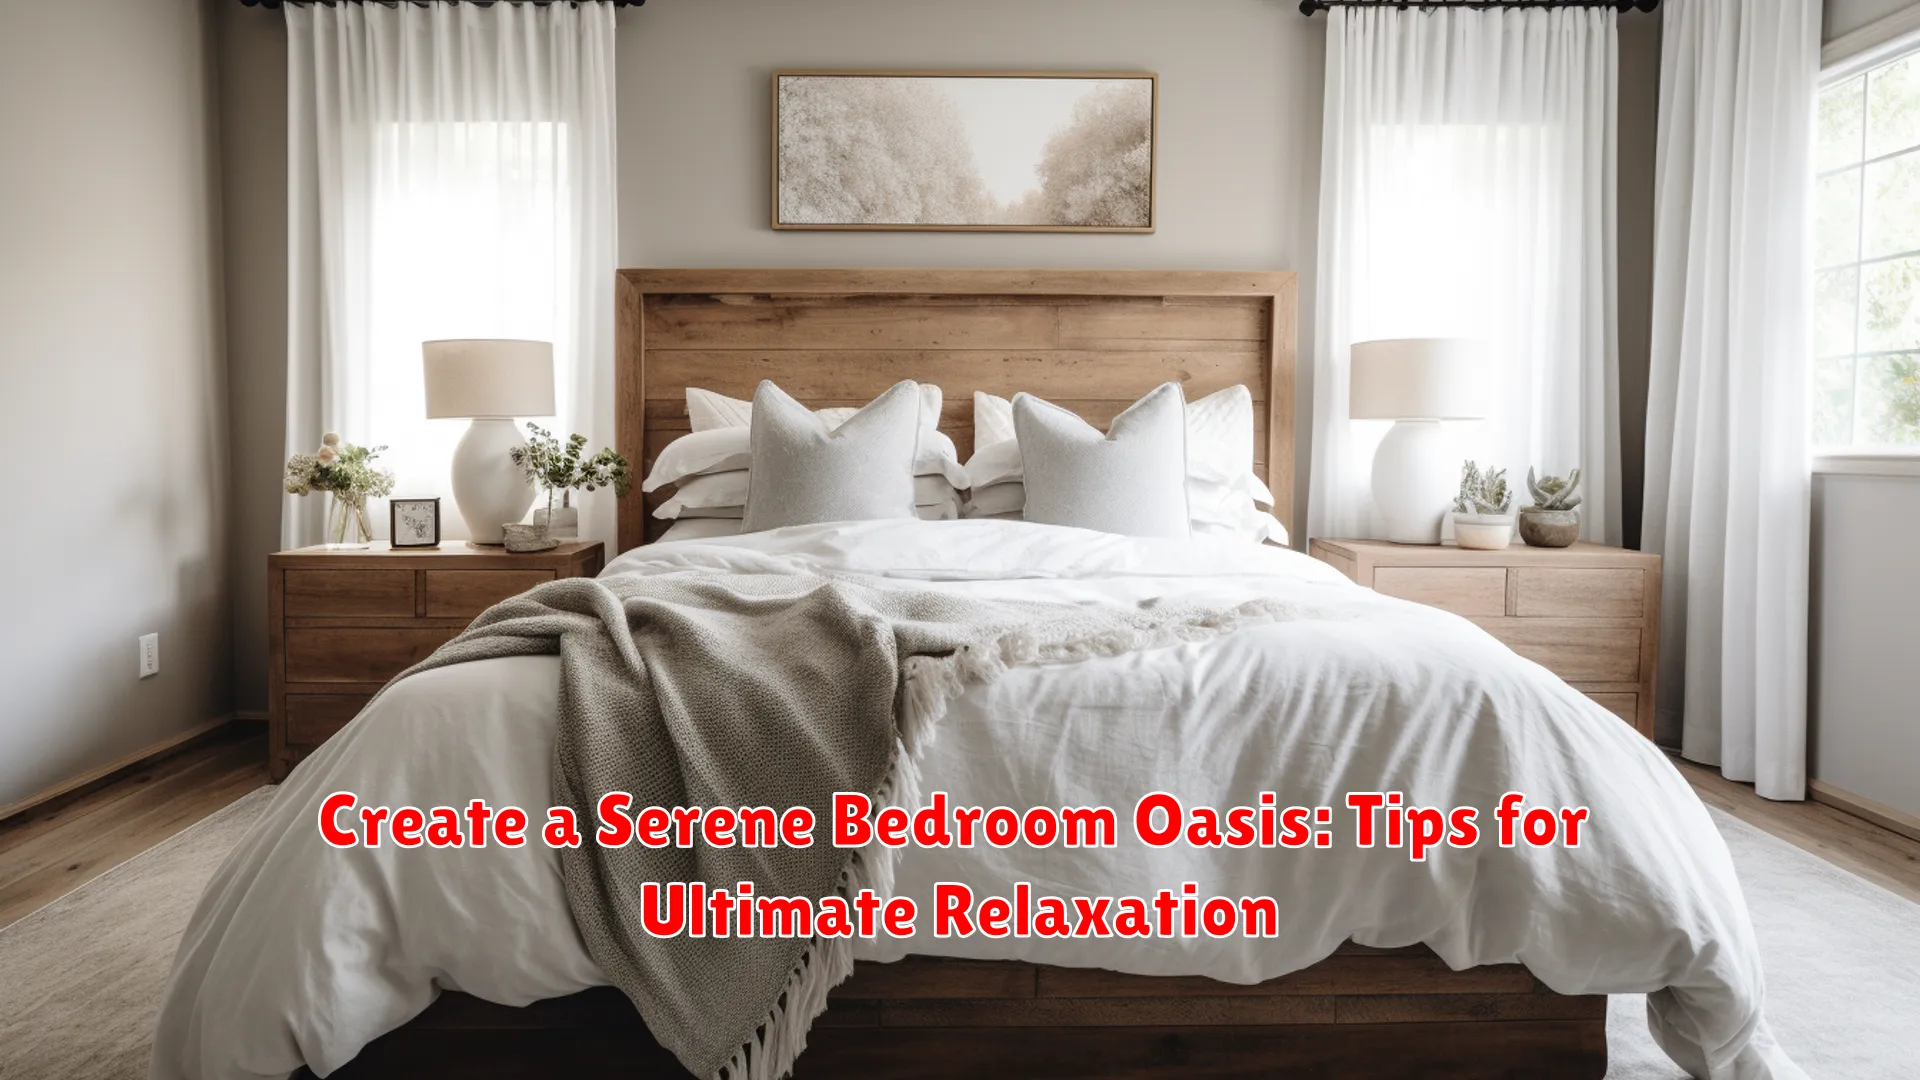 Create a Serene Bedroom Oasis: Tips for Ultimate Relaxation